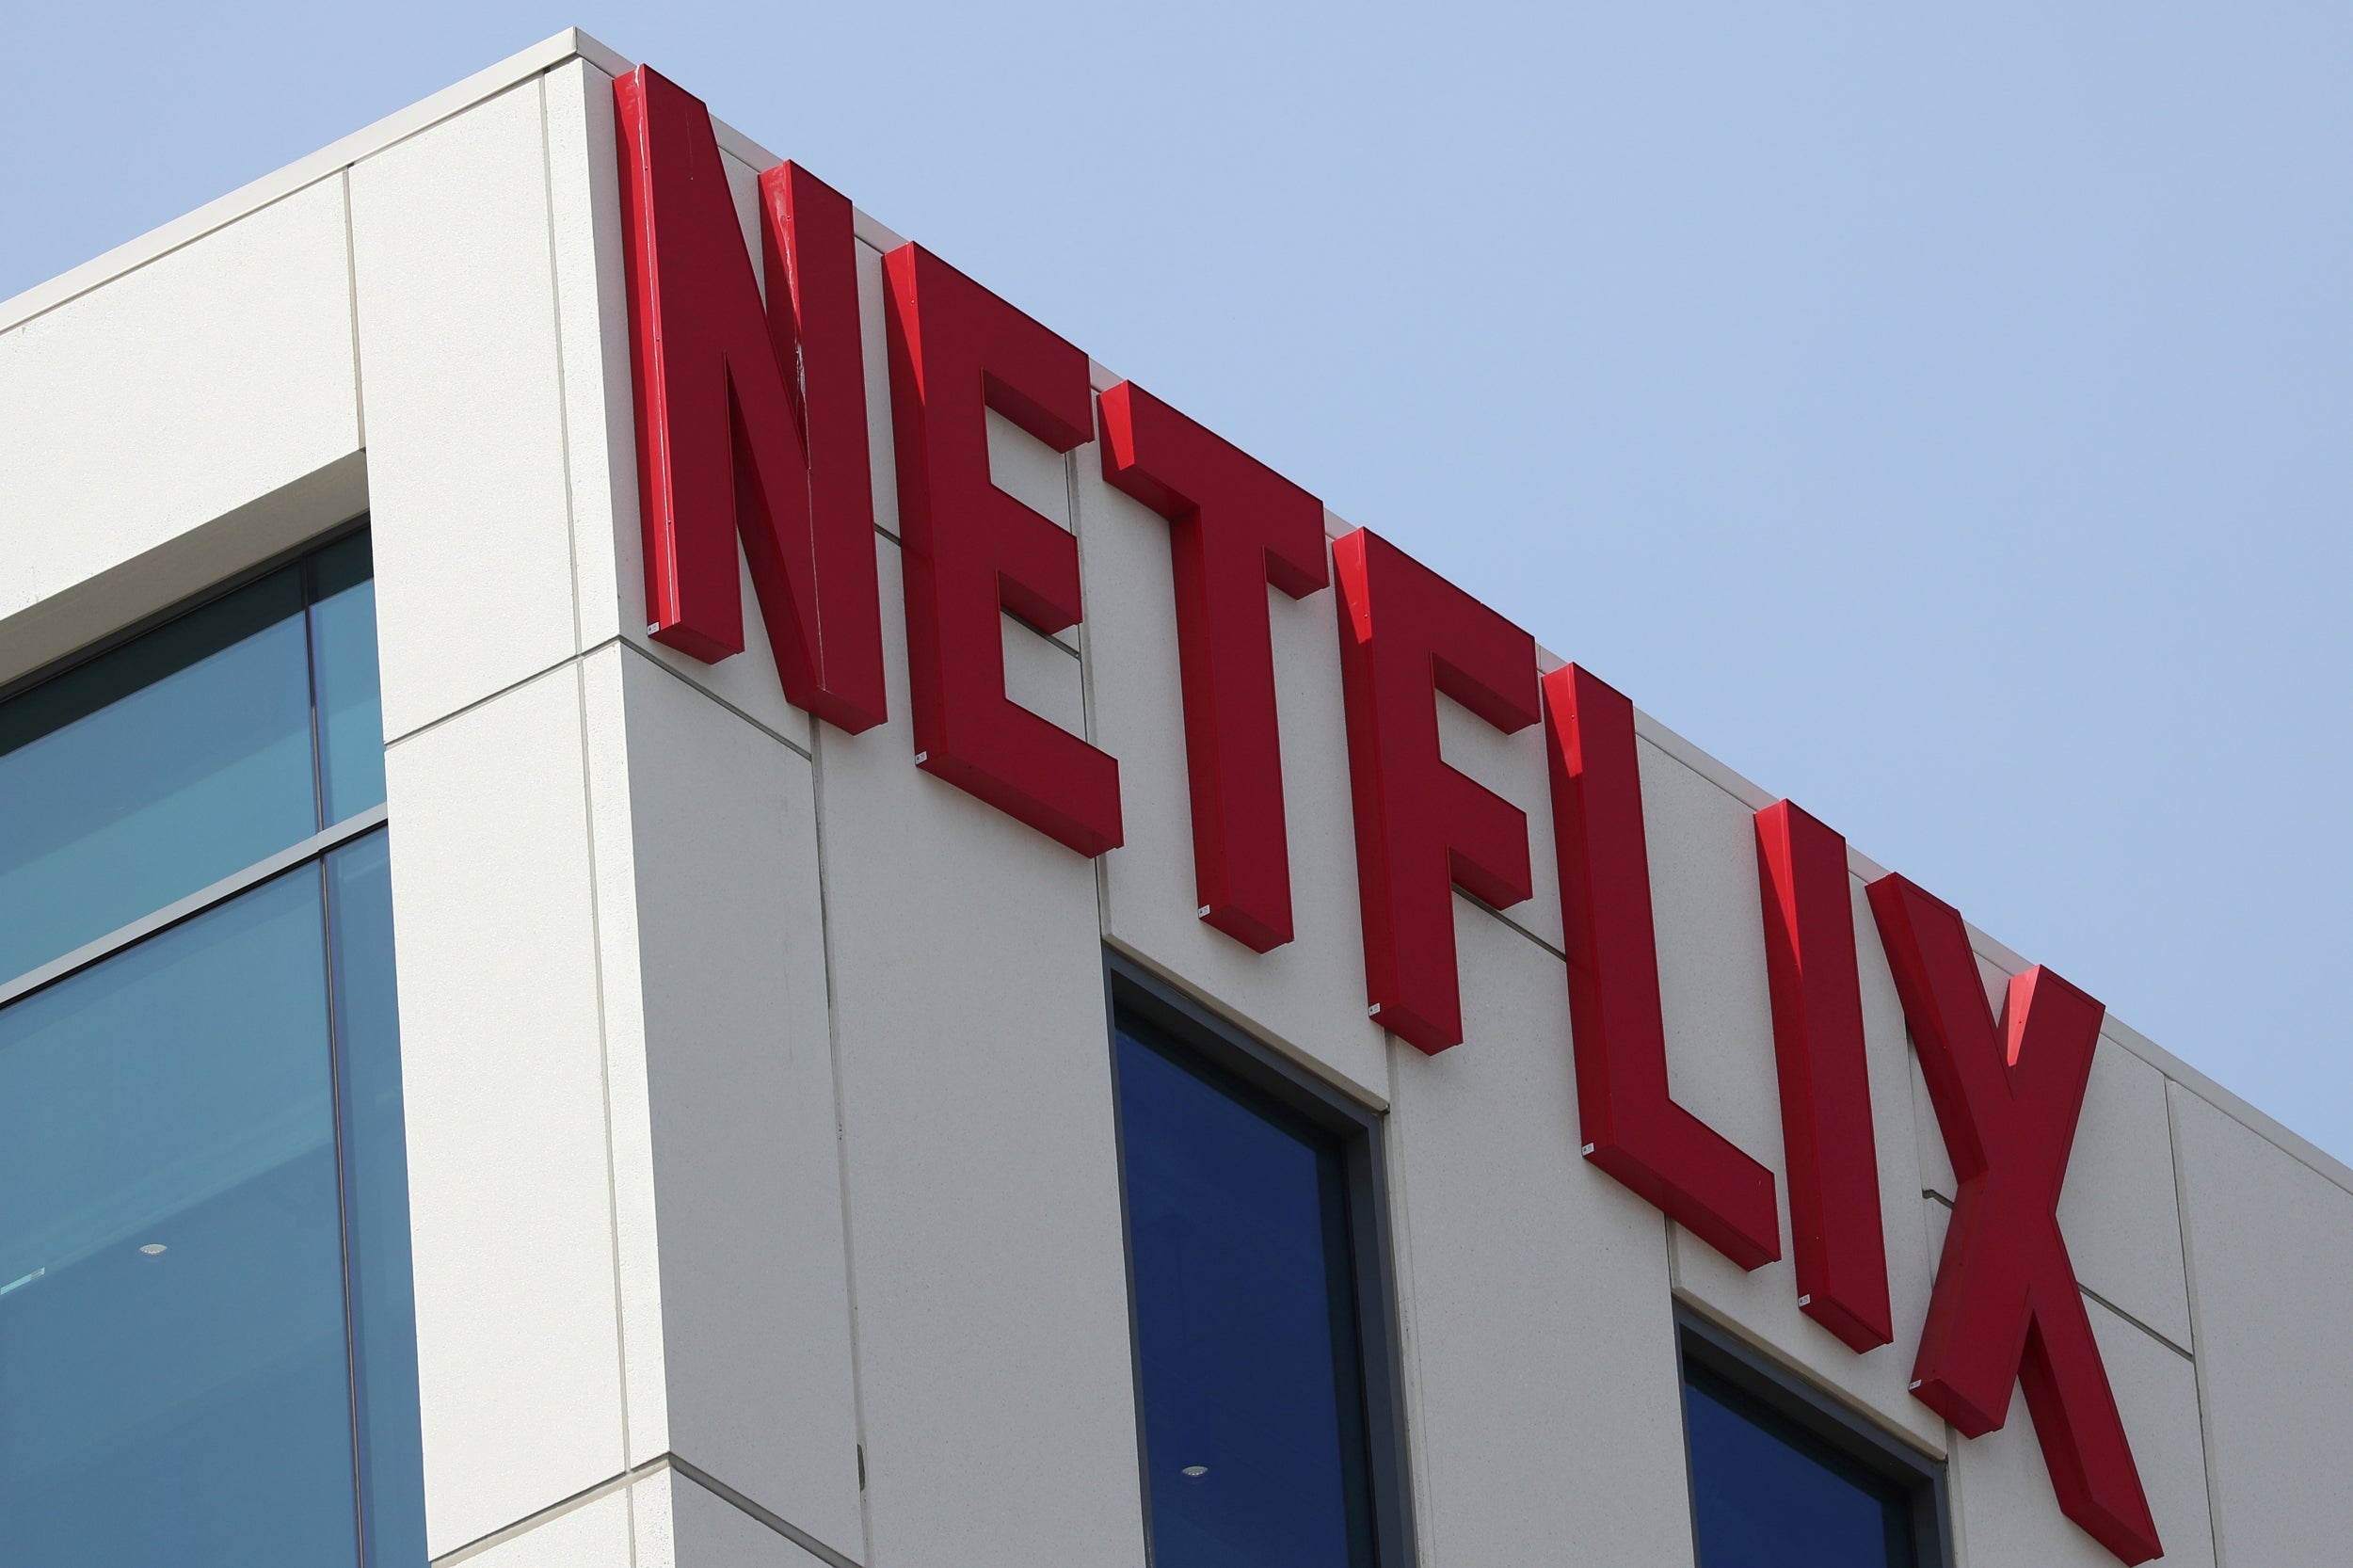 In the US, Netflix’s biggest market, it had 60.1 million paid-up members at the end of the quarter, down from 60.2 million